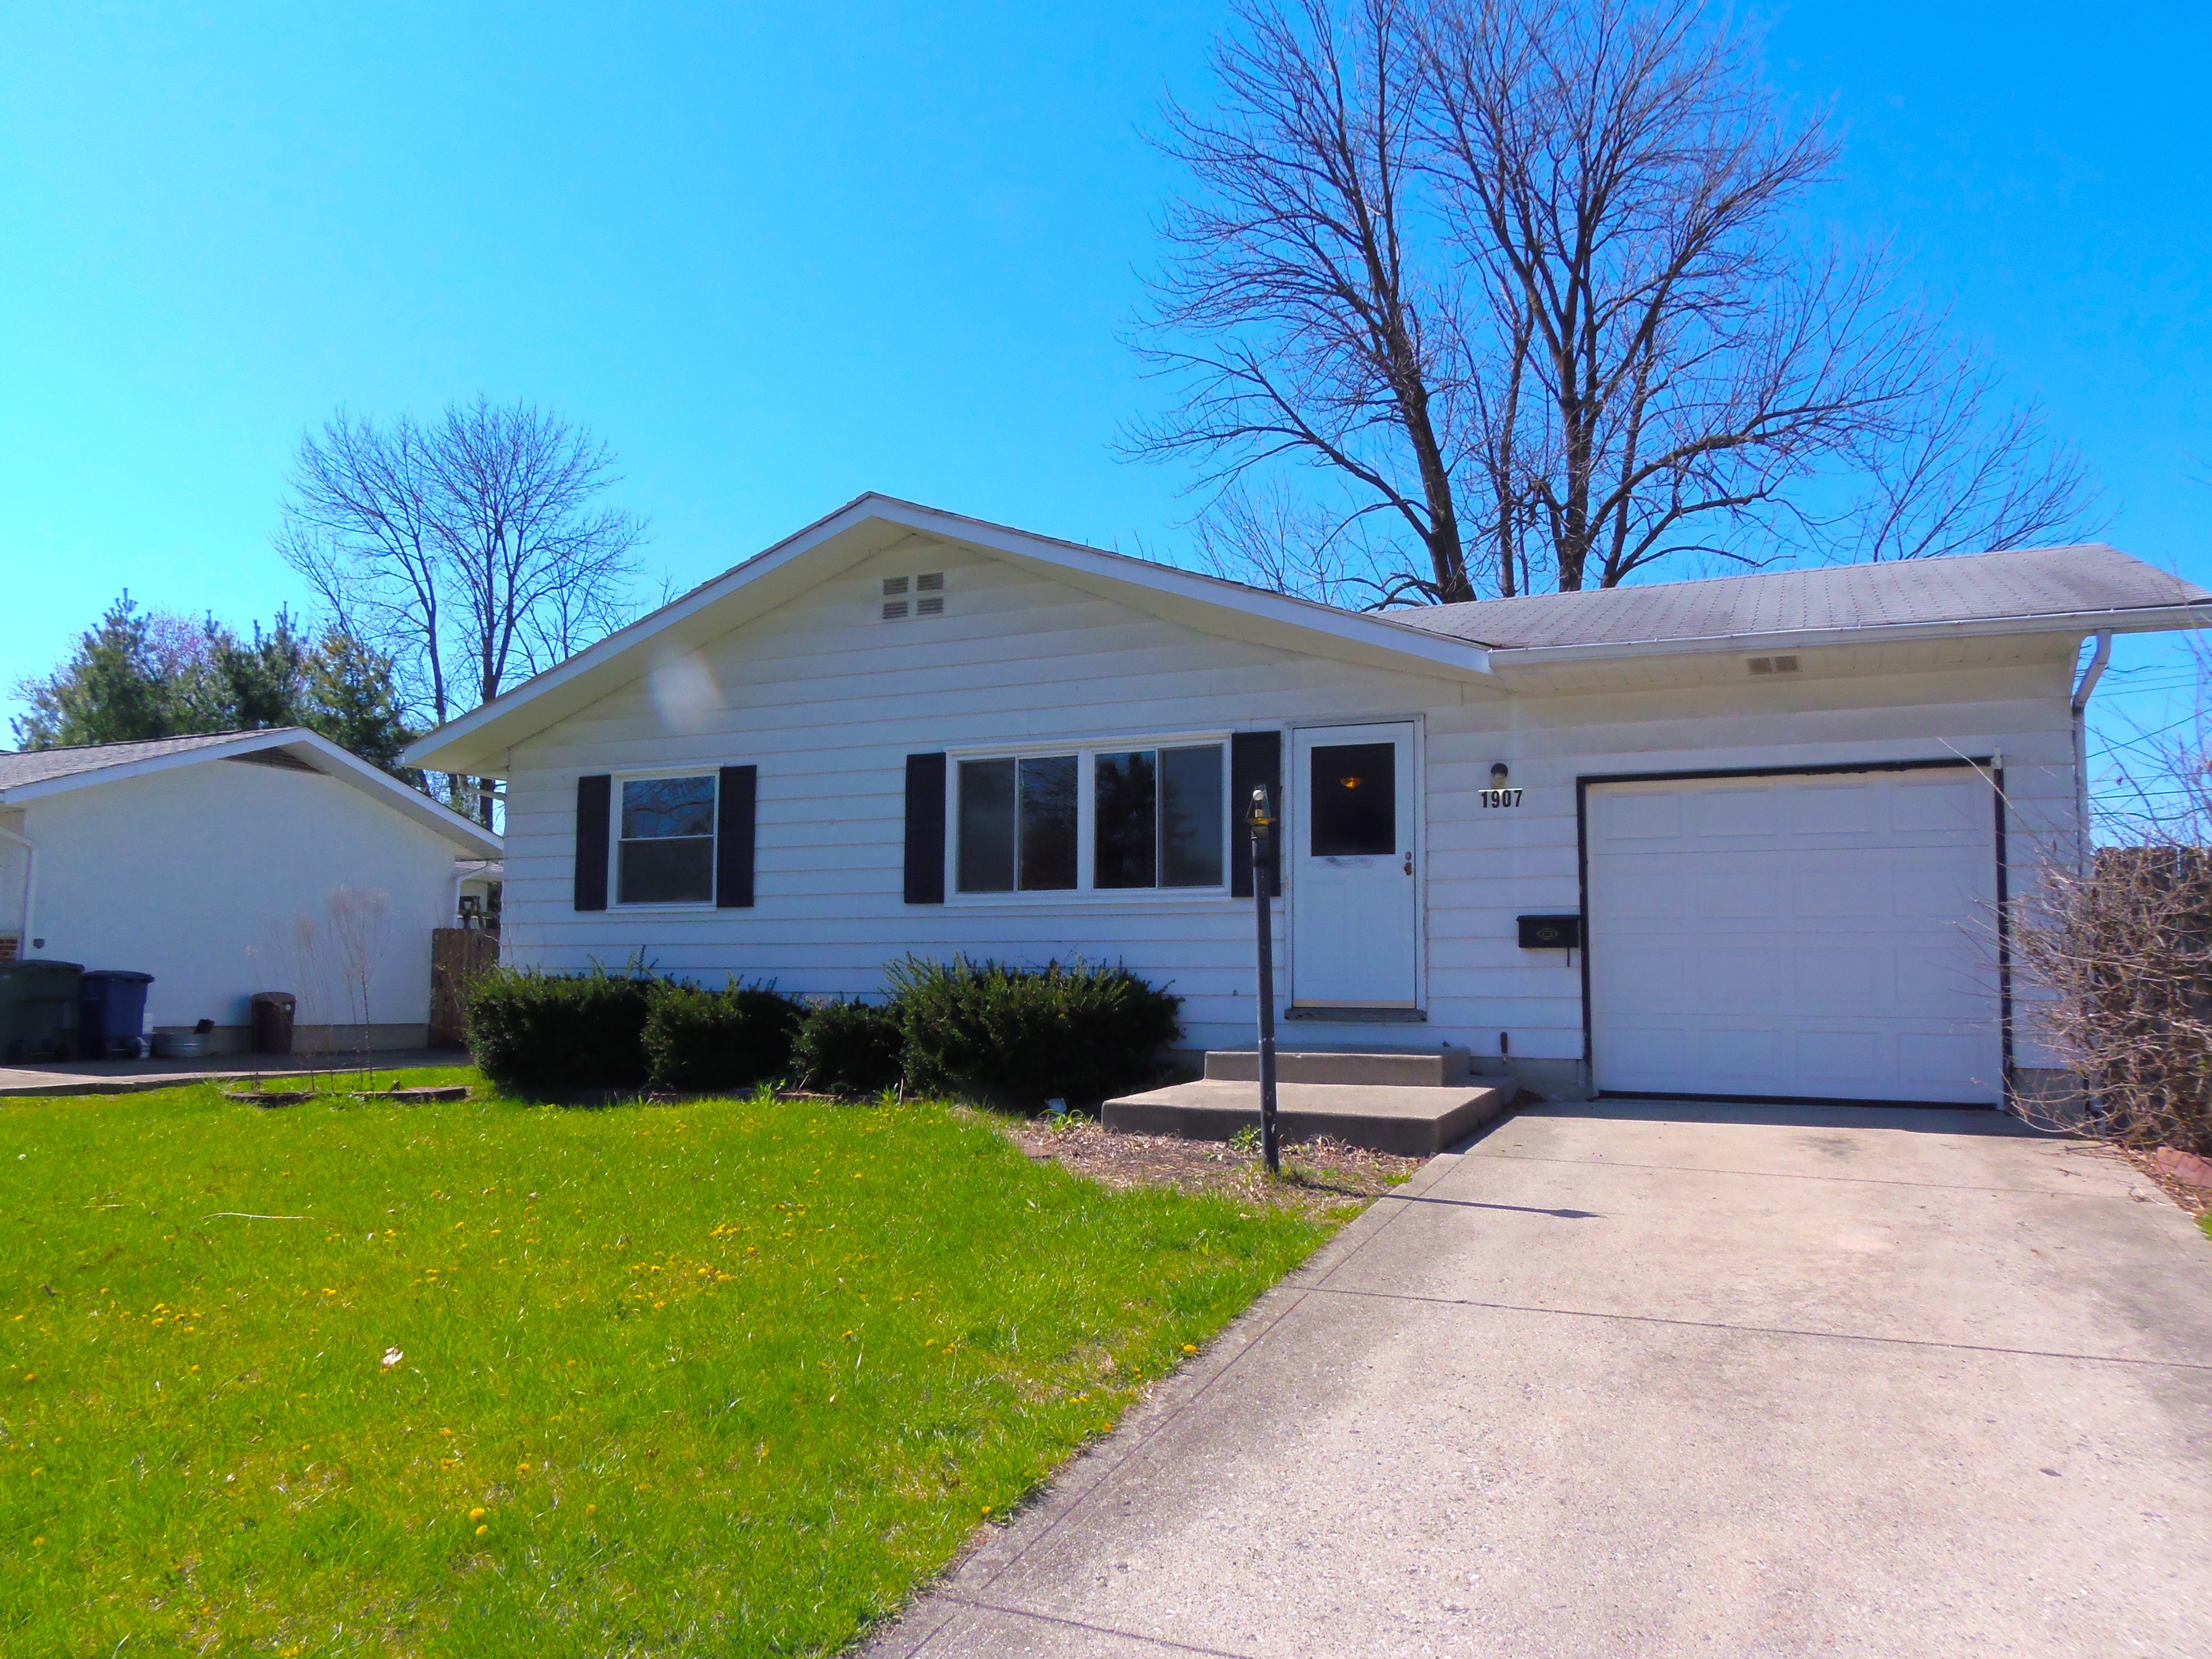 East Columbus Ohio Home For Rent » Vip Realty